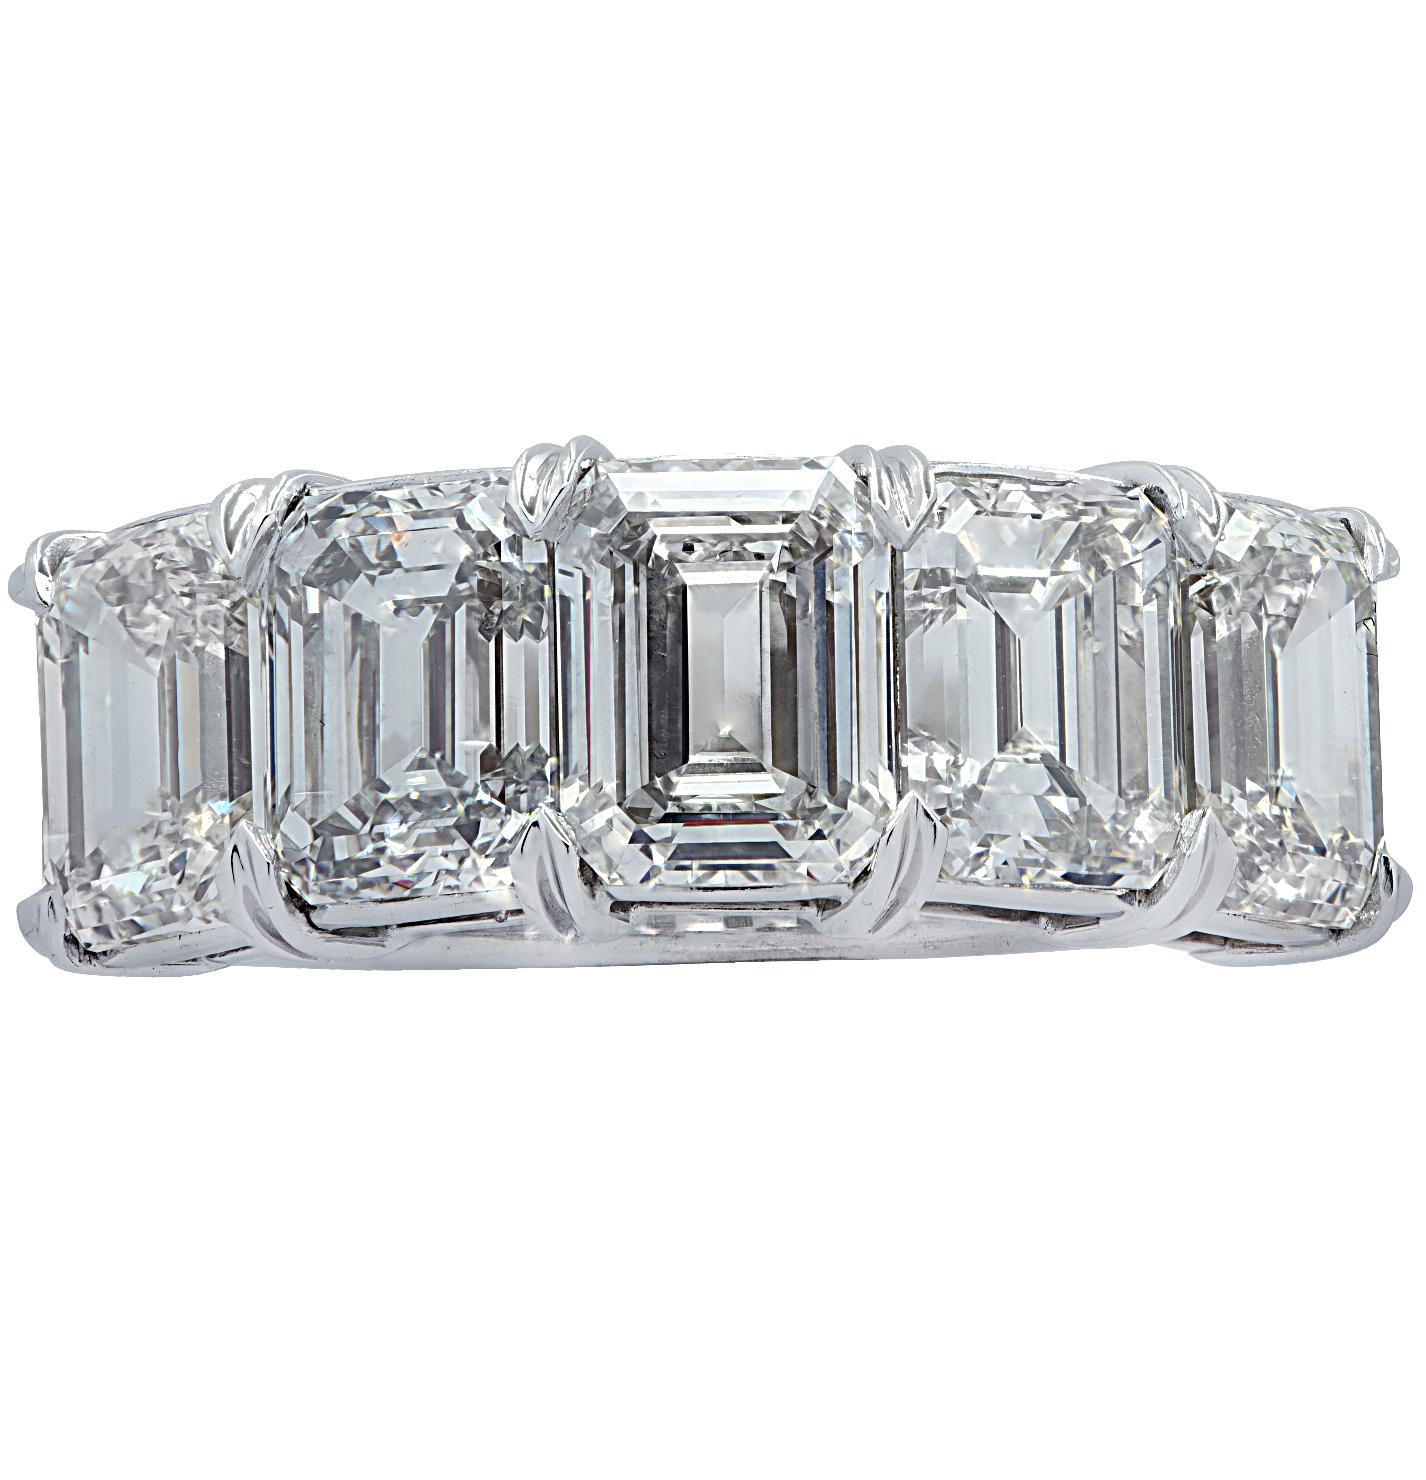 Stunning Vivid Diamonds five stone wedding band crafted in platinum, showcasing 5 spectacular emerald cut diamonds weighing 6.02 carats total, J-K color, VS clarity. Each diamond was carefully selected, perfectly matched and set in a seamless sea of